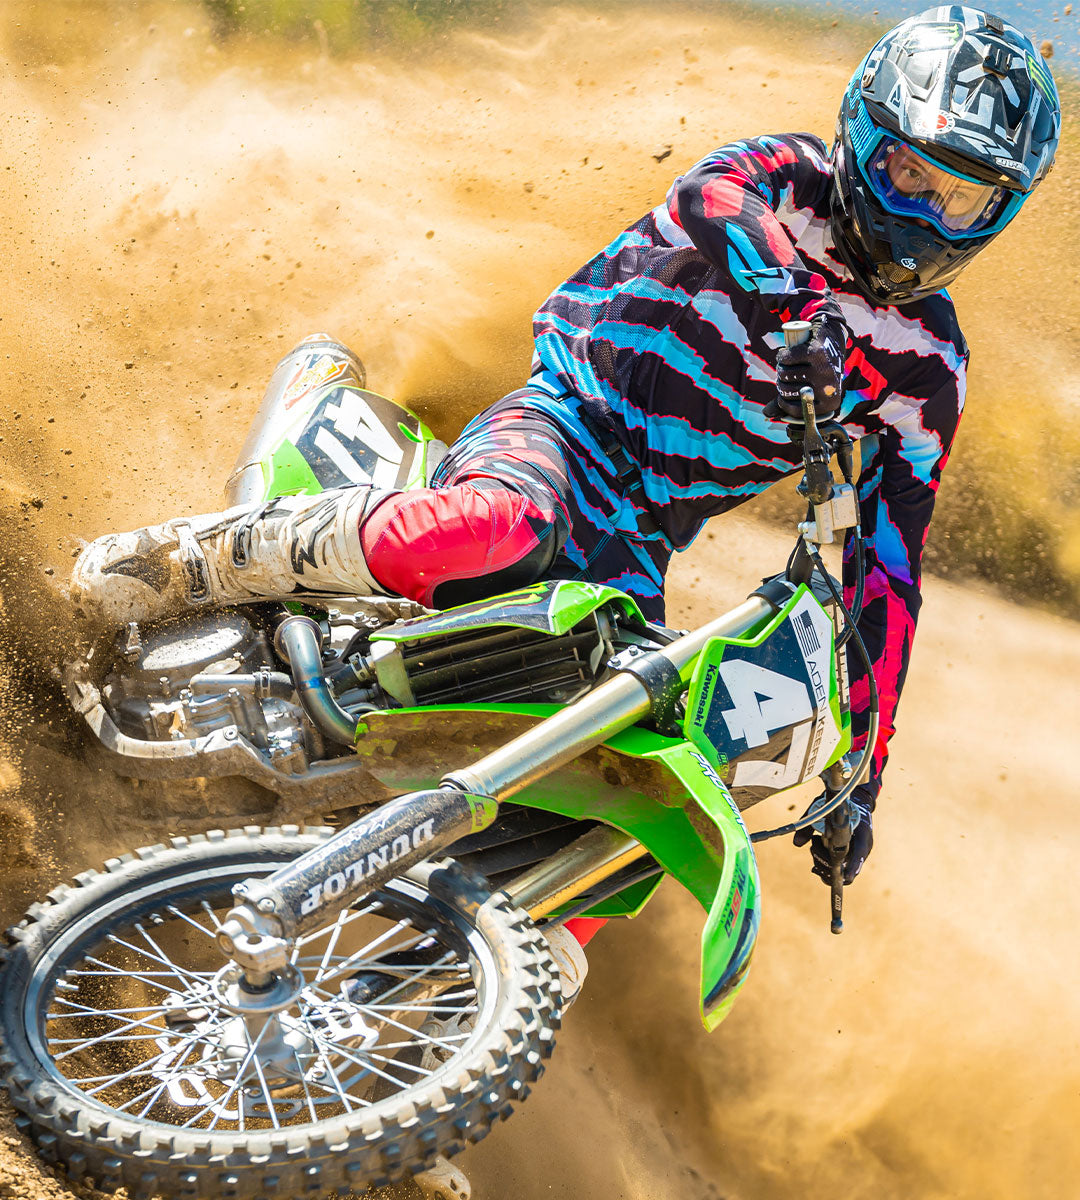 An image of a MX rider sporting the '24 Podium jersey and pant